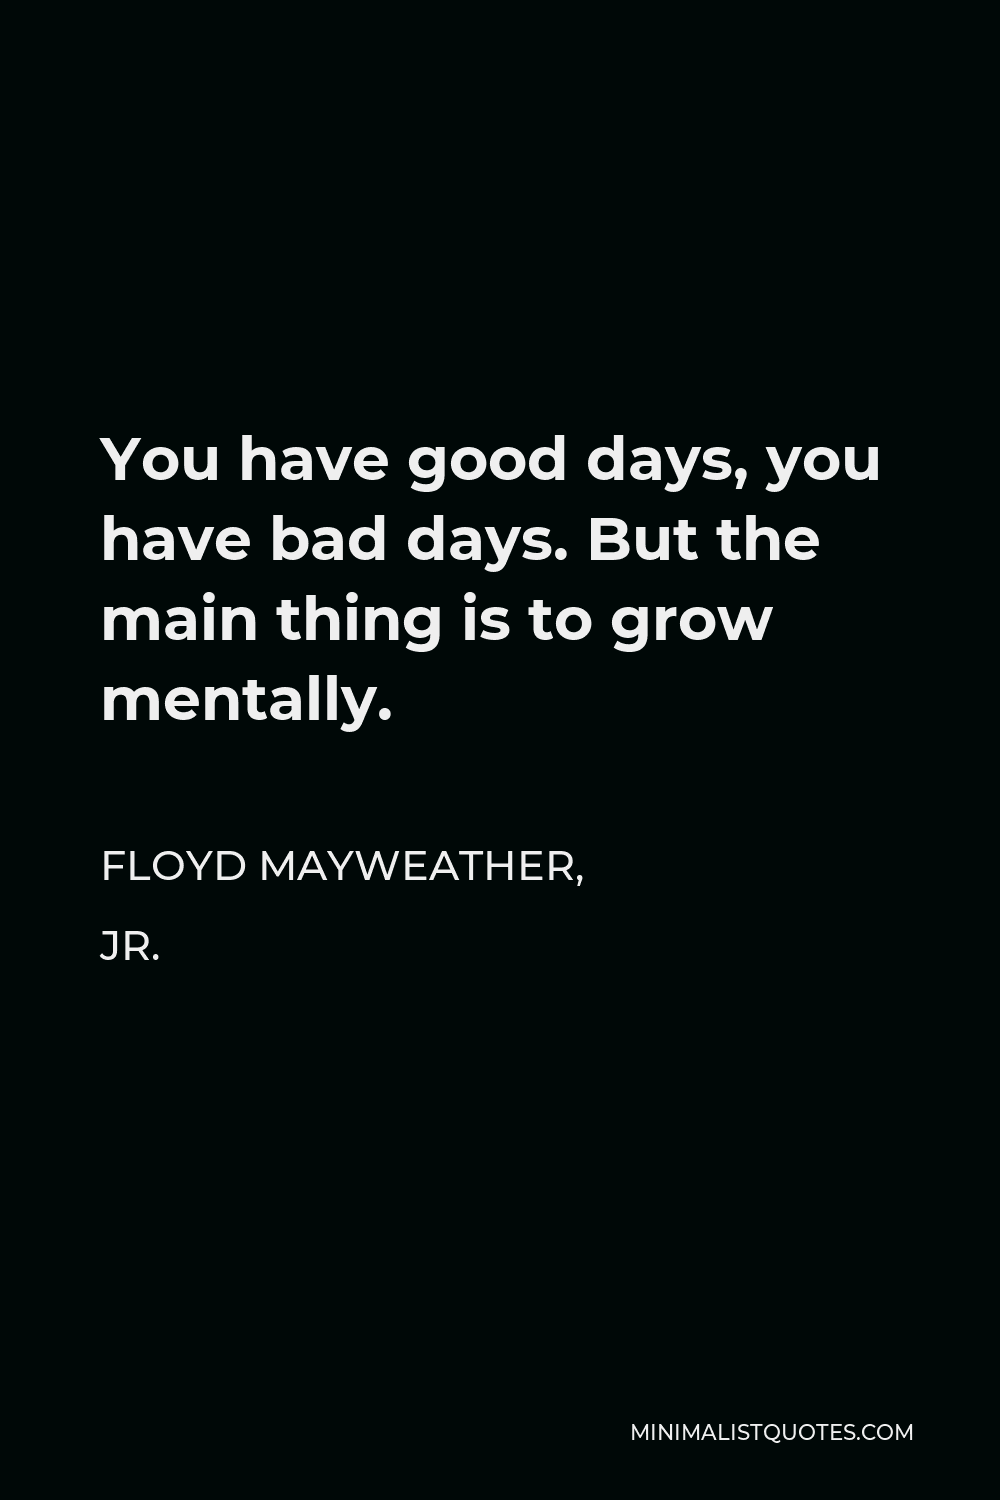 Floyd Mayweather, Jr. Quote - You have good days, you have bad days. But the main thing is to grow mentally.